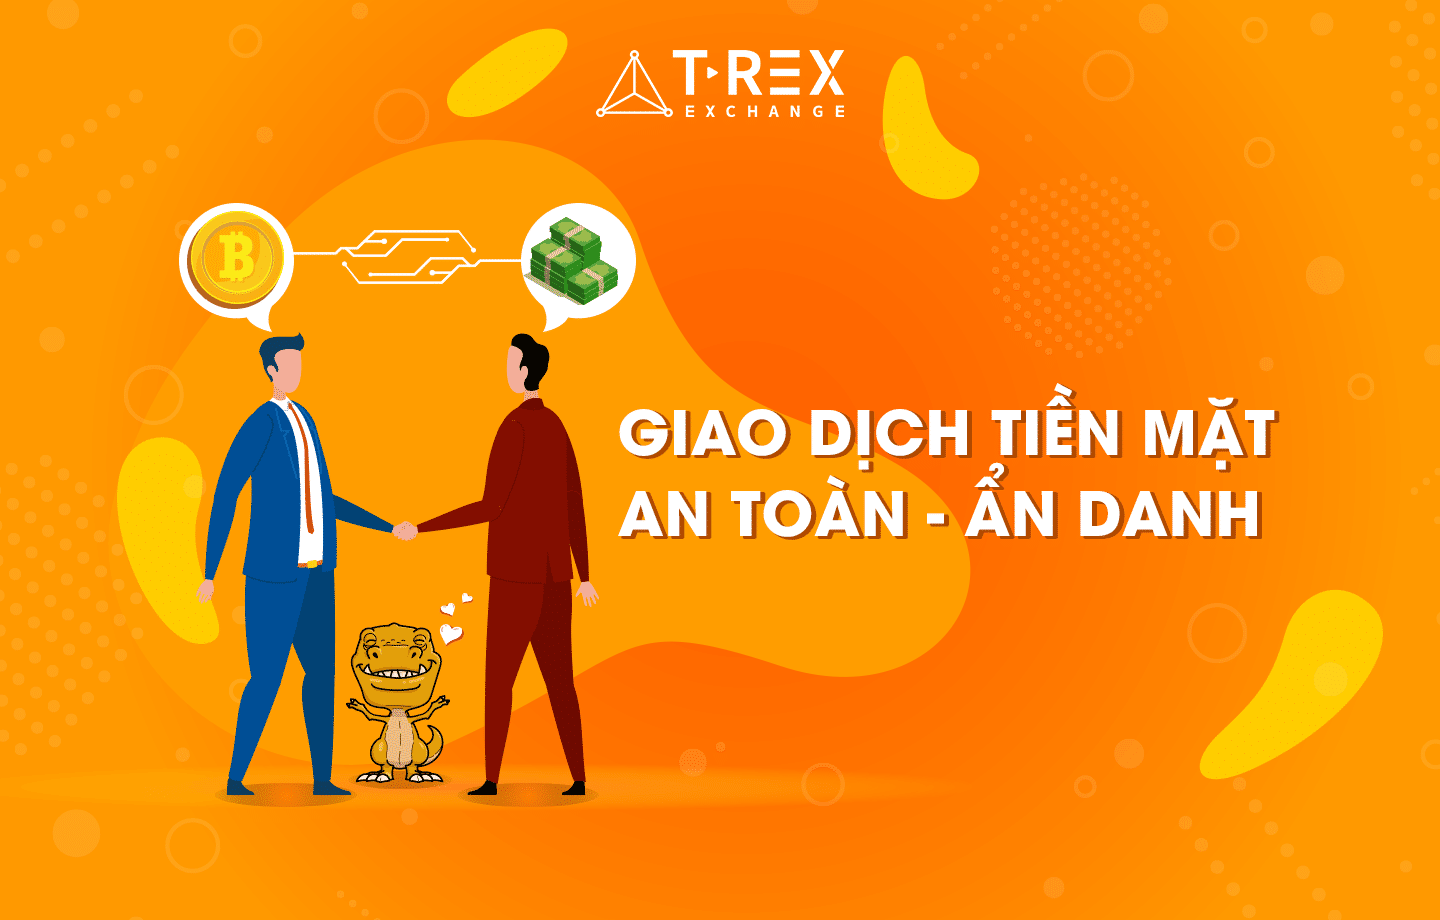 Cash transaction first appeared in Vietnam on the T-Rex Exchange